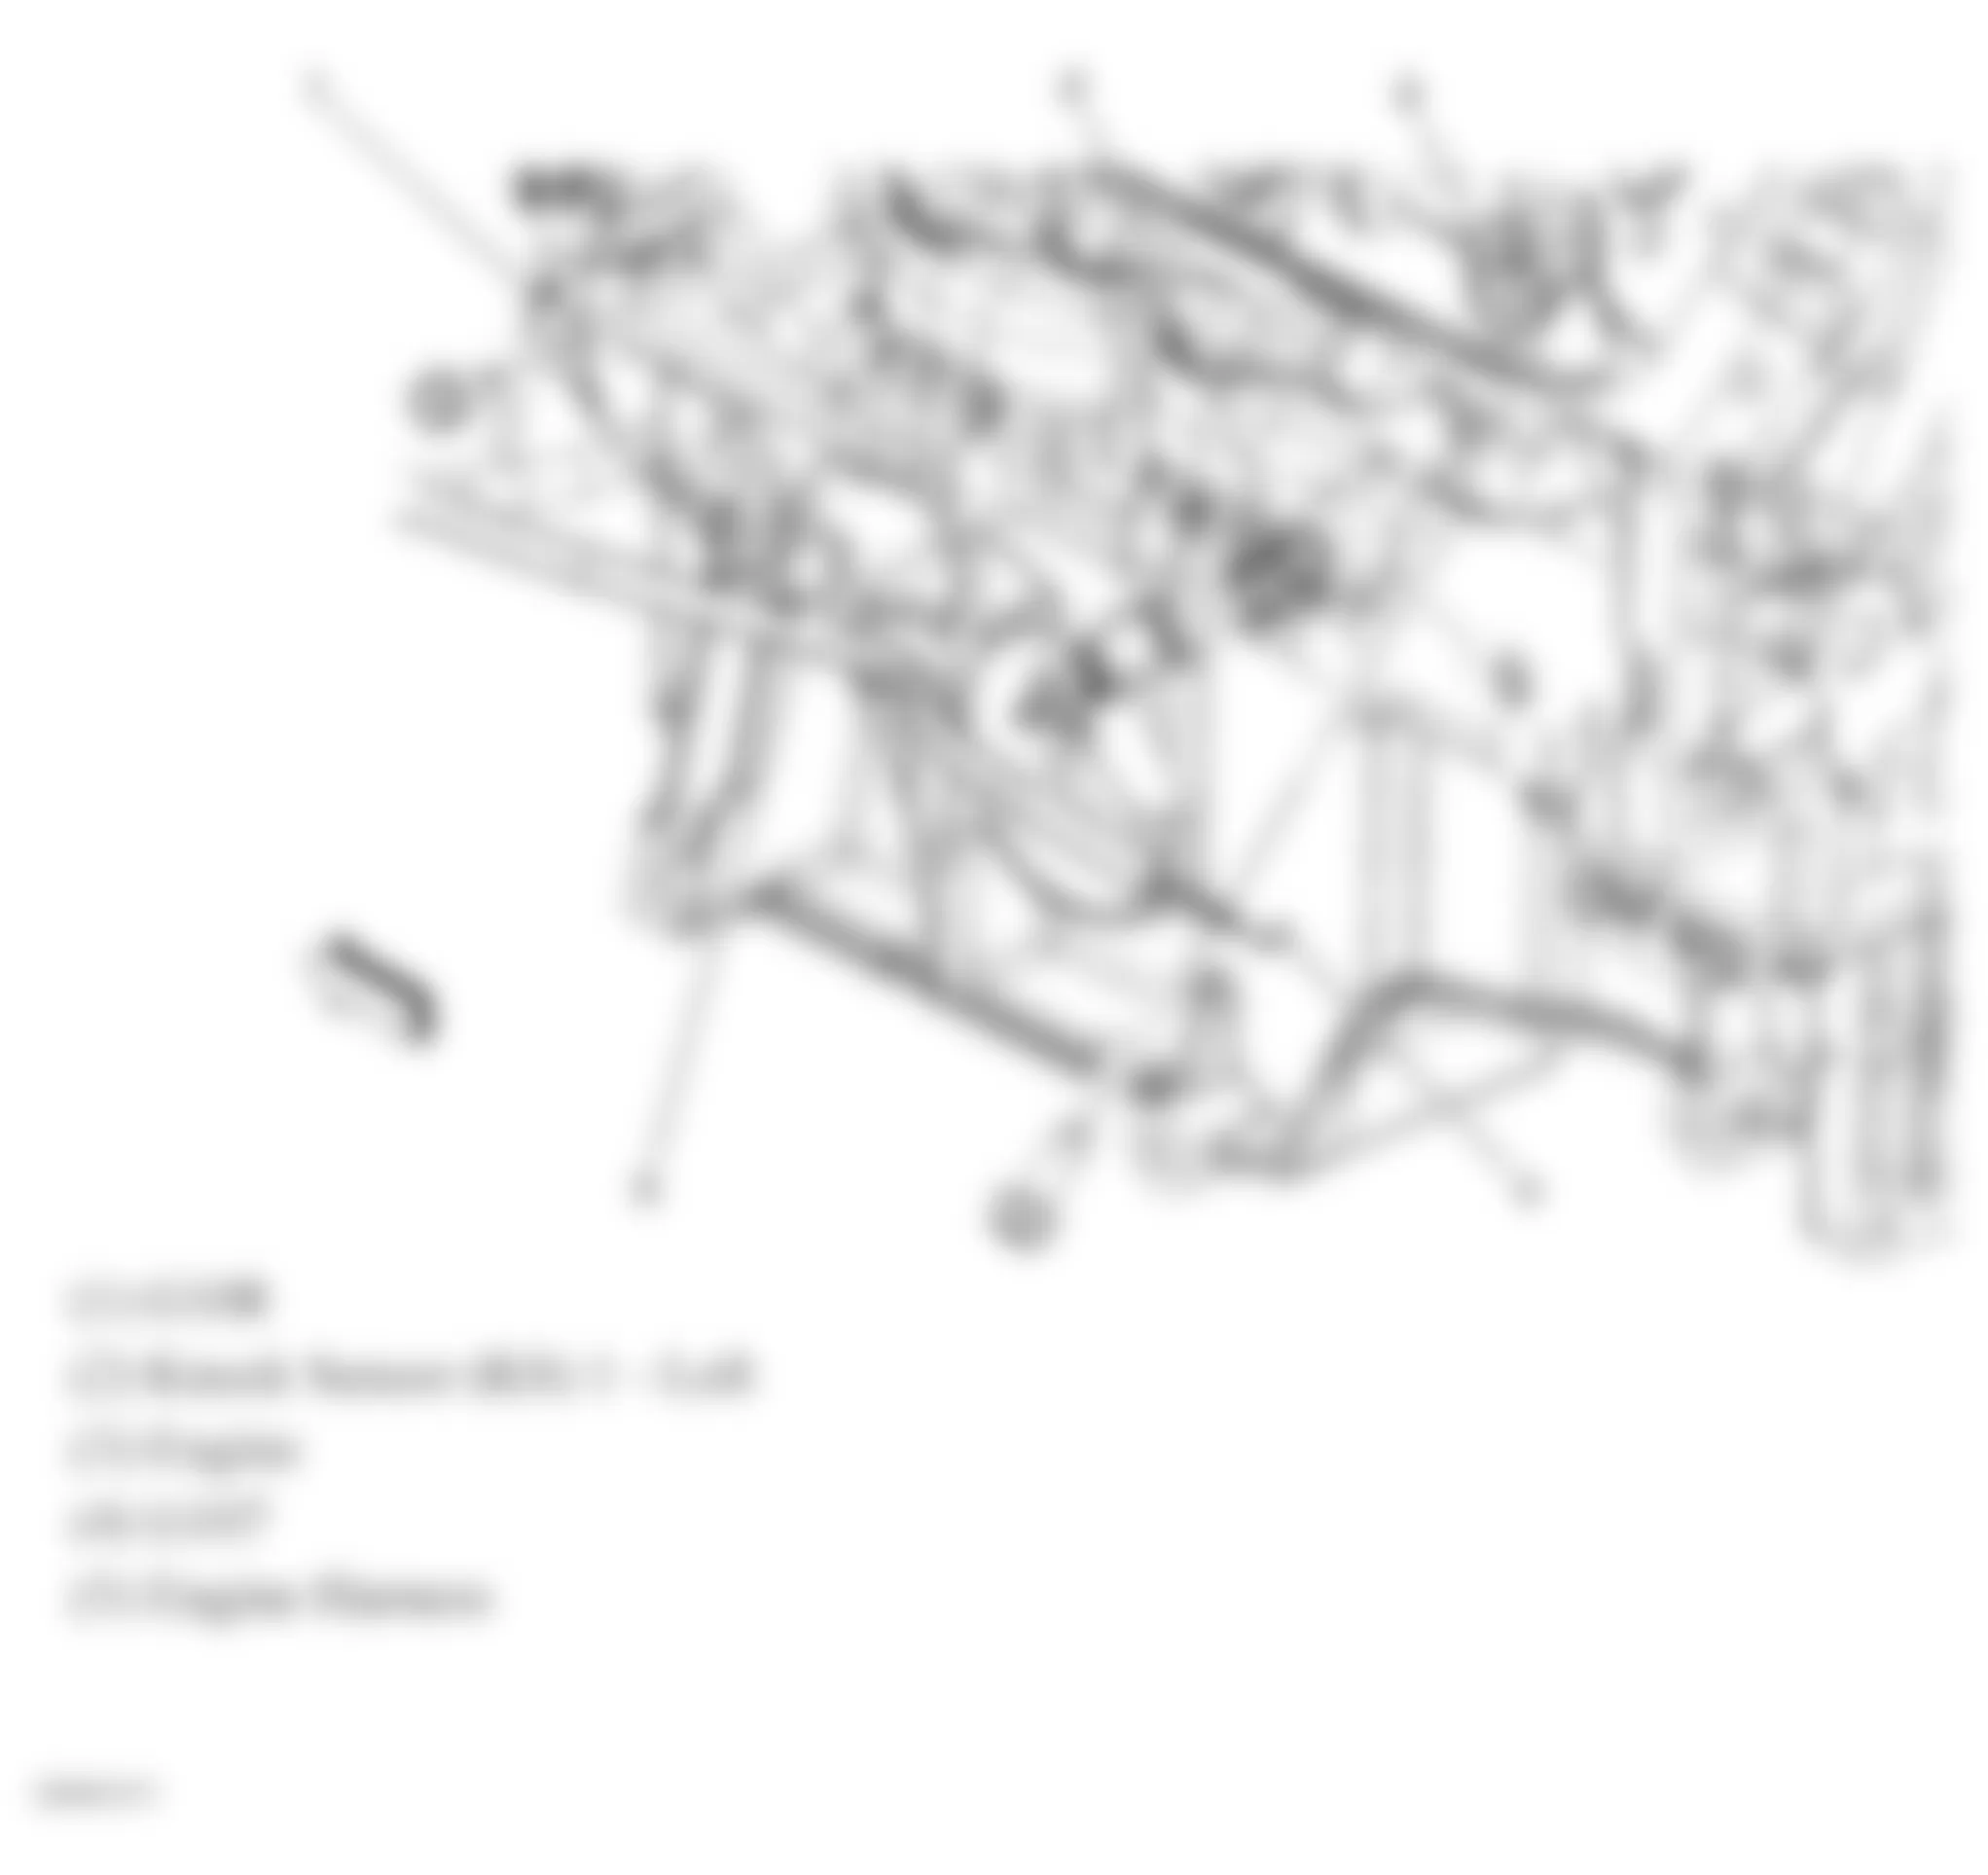 GMC Envoy 2008 - Component Locations -  Lower Left Side Of Engine (5.3L/6.0L)